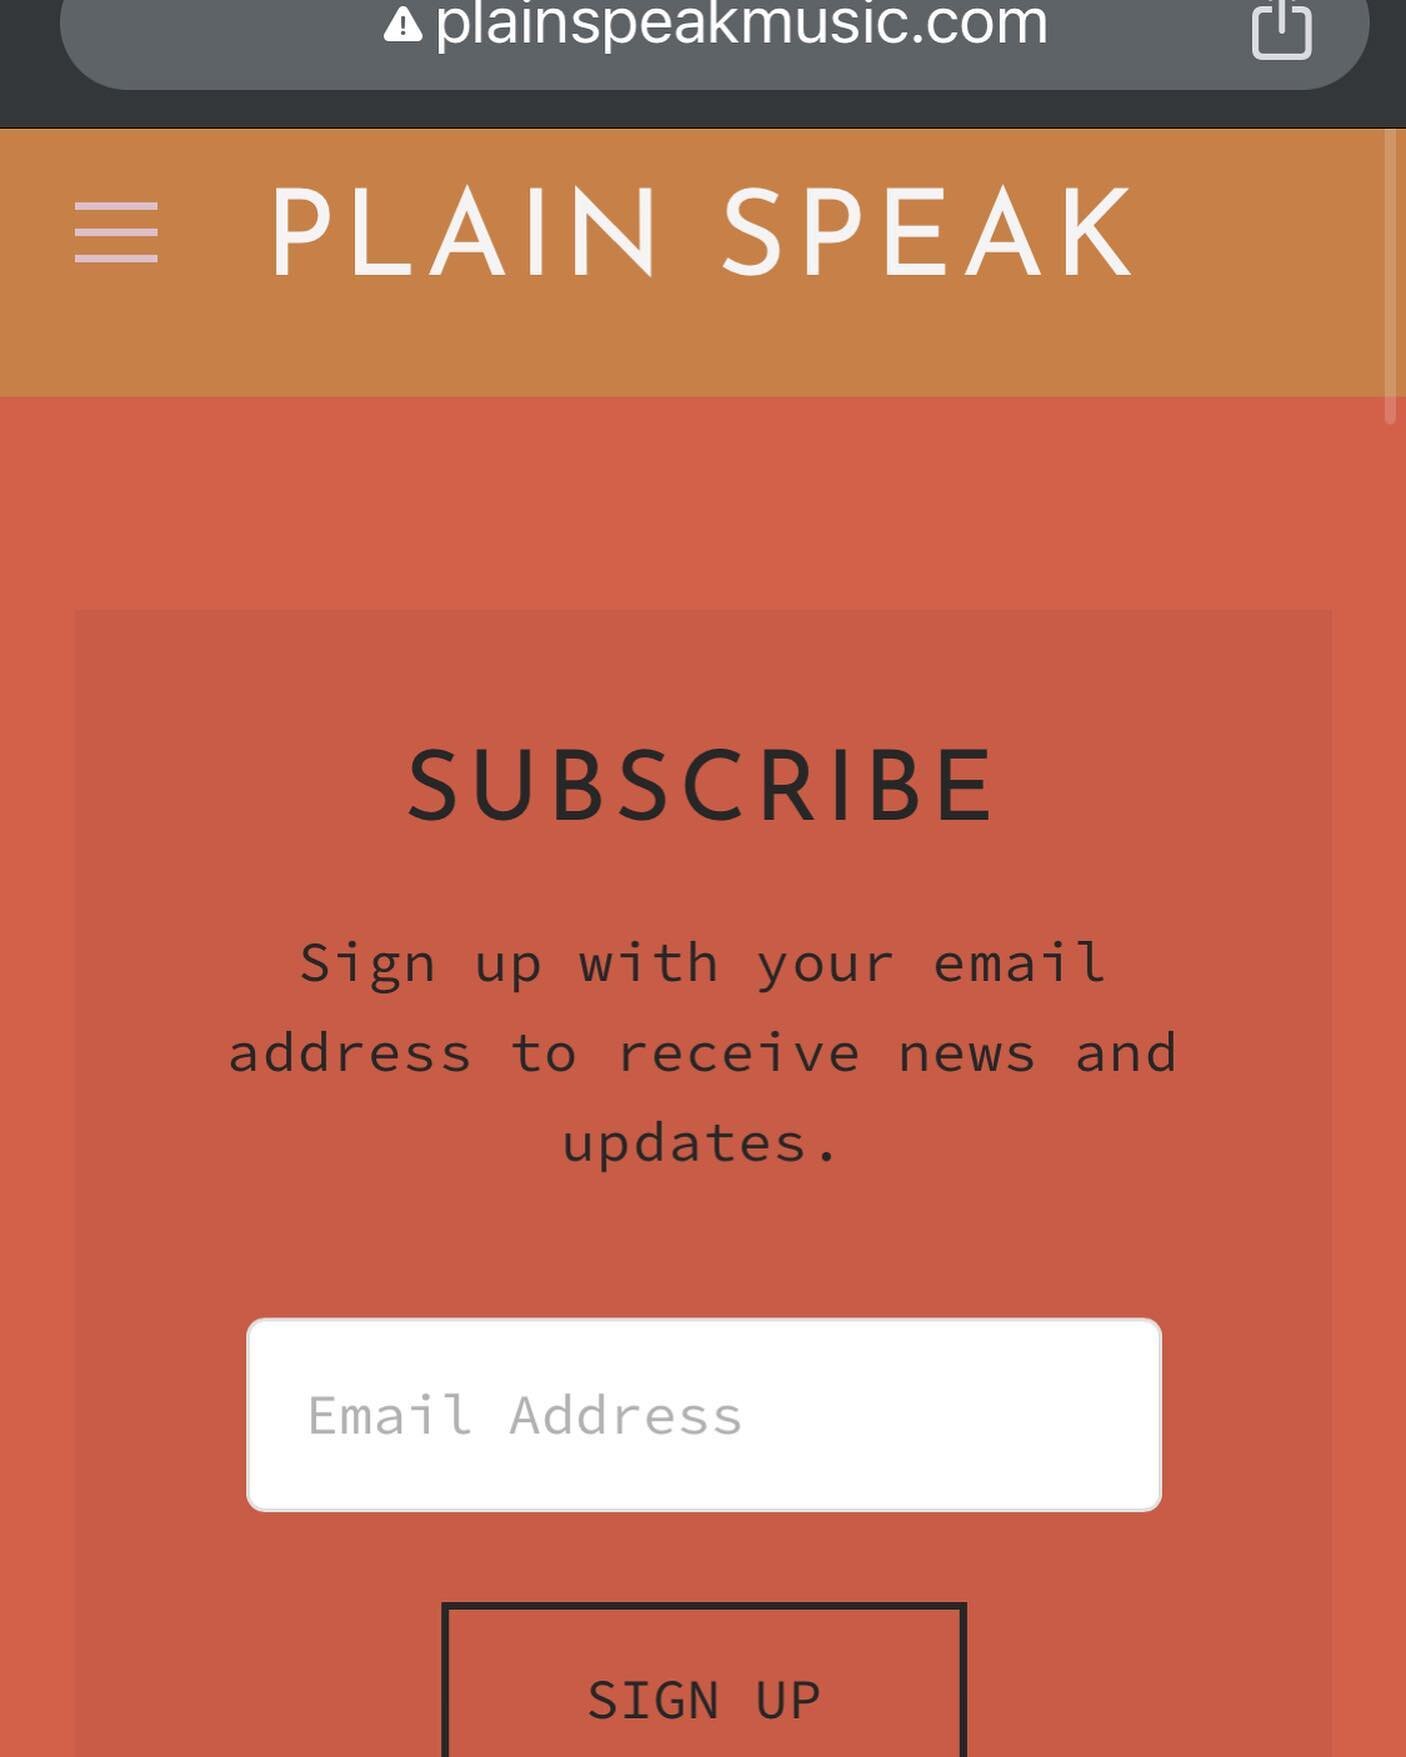 Friendly reminder to sign up for the Plain Speak newsletter *ESPECIALLY* if you&rsquo;re following for pedal stuff

Special announcement coming tomorrow and newsletter will get first bite.
.
.
.
#plainspeak #calamity #calamitydrive #music #gear #musi